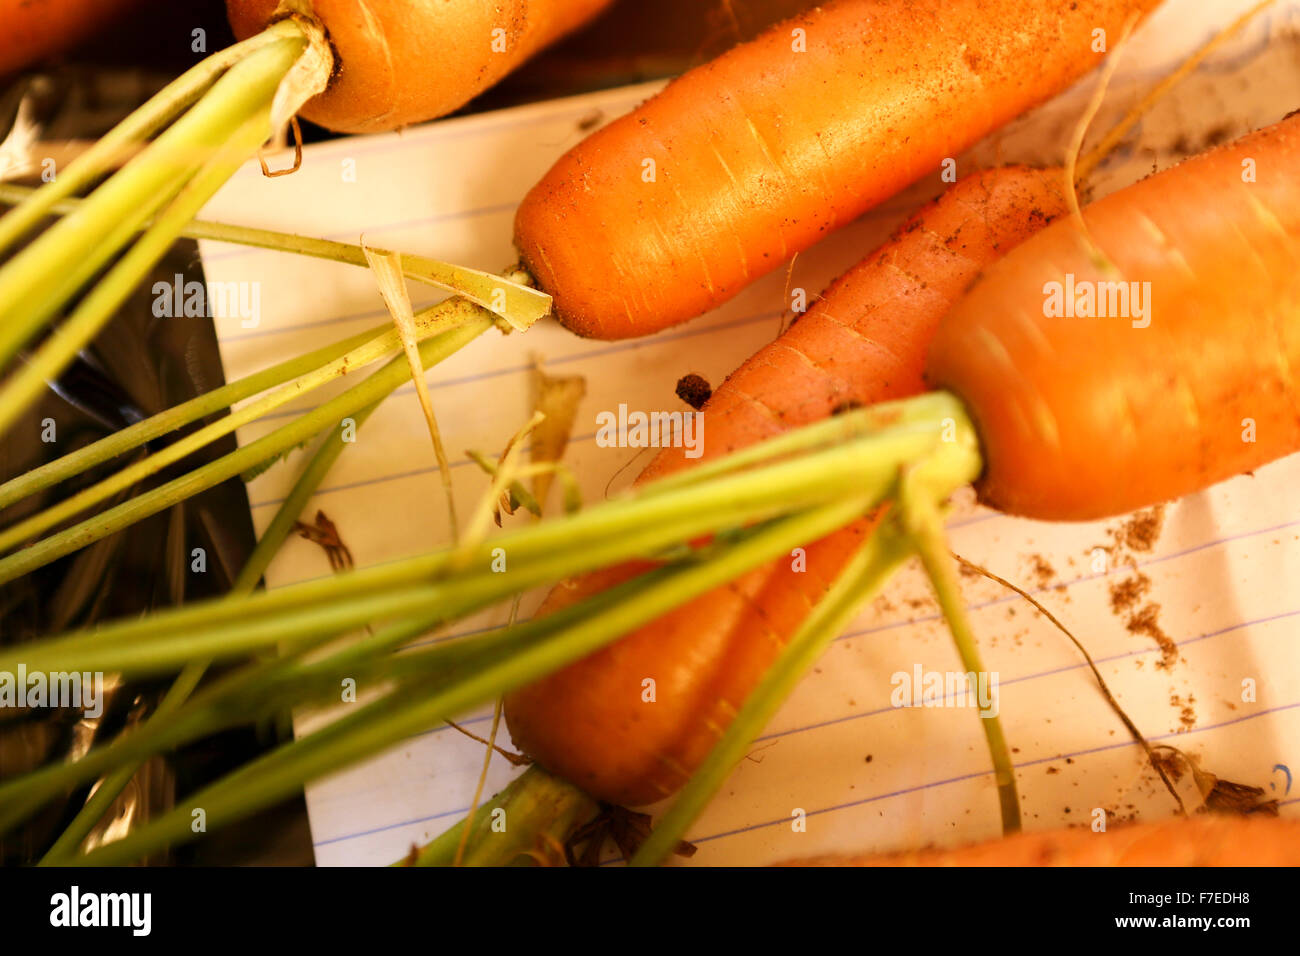 Home grown carrots from a small Organic vegetable patch Stock Photo